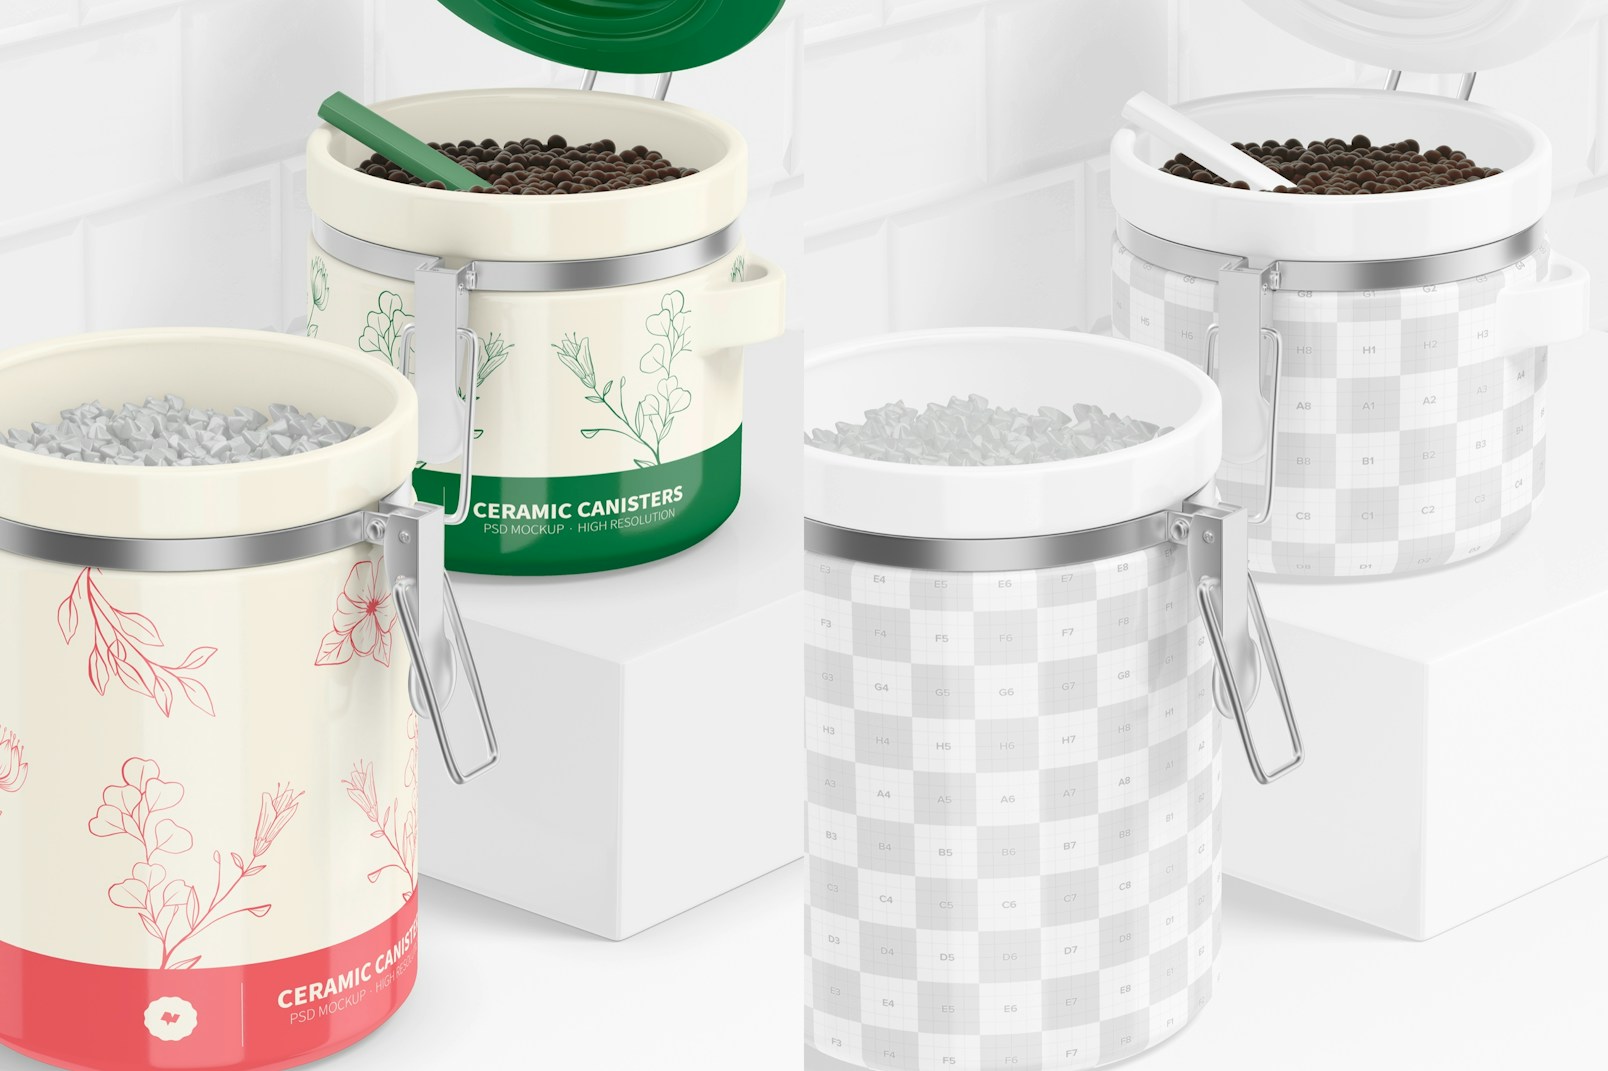 Ceramic Canisters with Spoon Mockup, Close Up